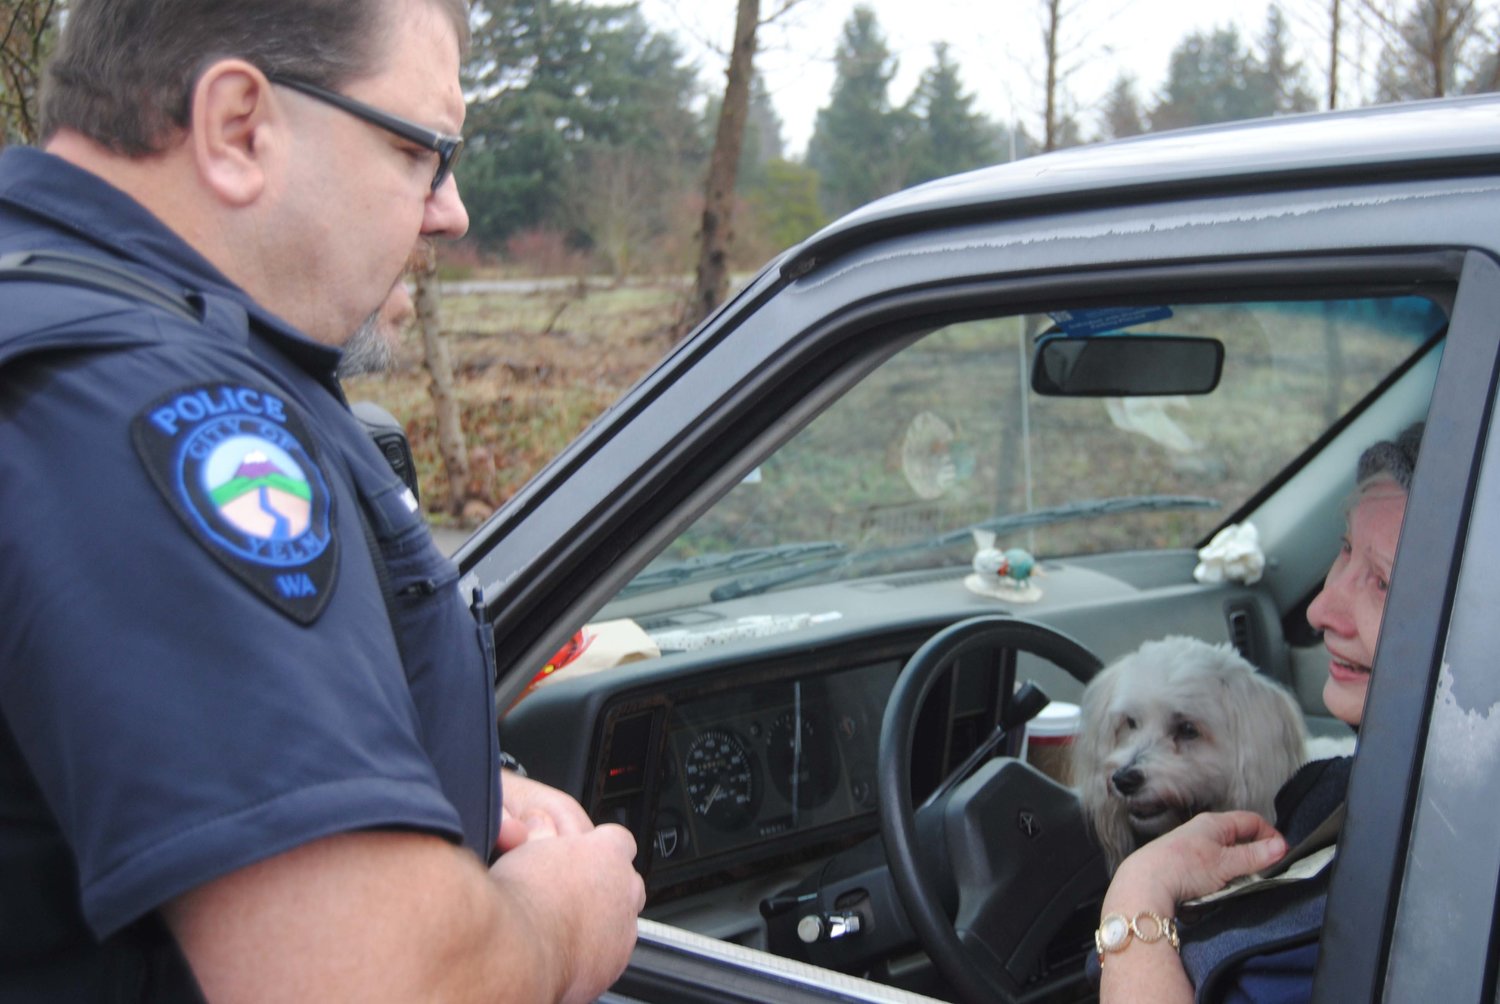 Yelm Police Officer Don Moody, after pulling over driver Elaine Kirkwood for not using a turn signal, gives her $100 instead of a ticket. It was part of a local "Secret Santa" giveaway of $5,000.